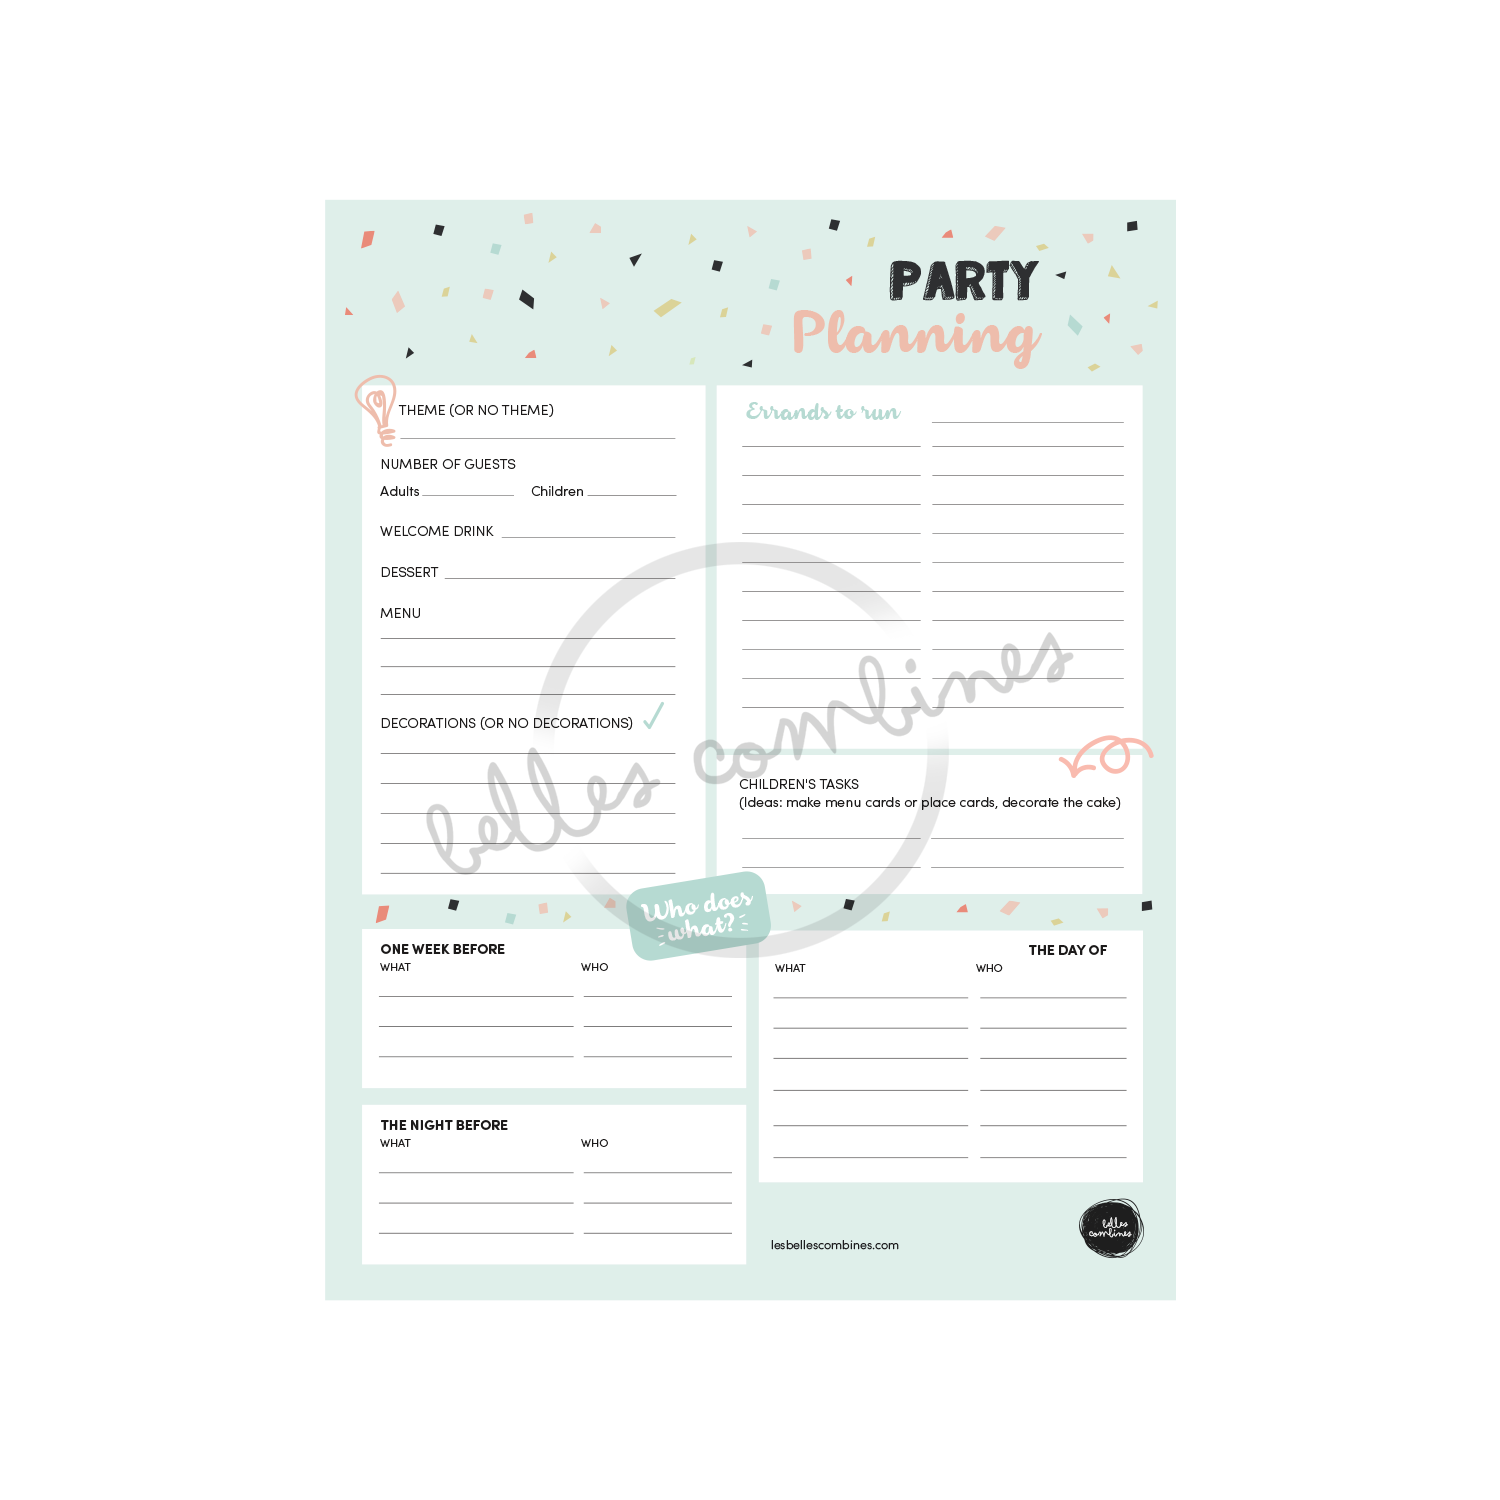 English version of the document to print Party planning made by Les Belles Combines